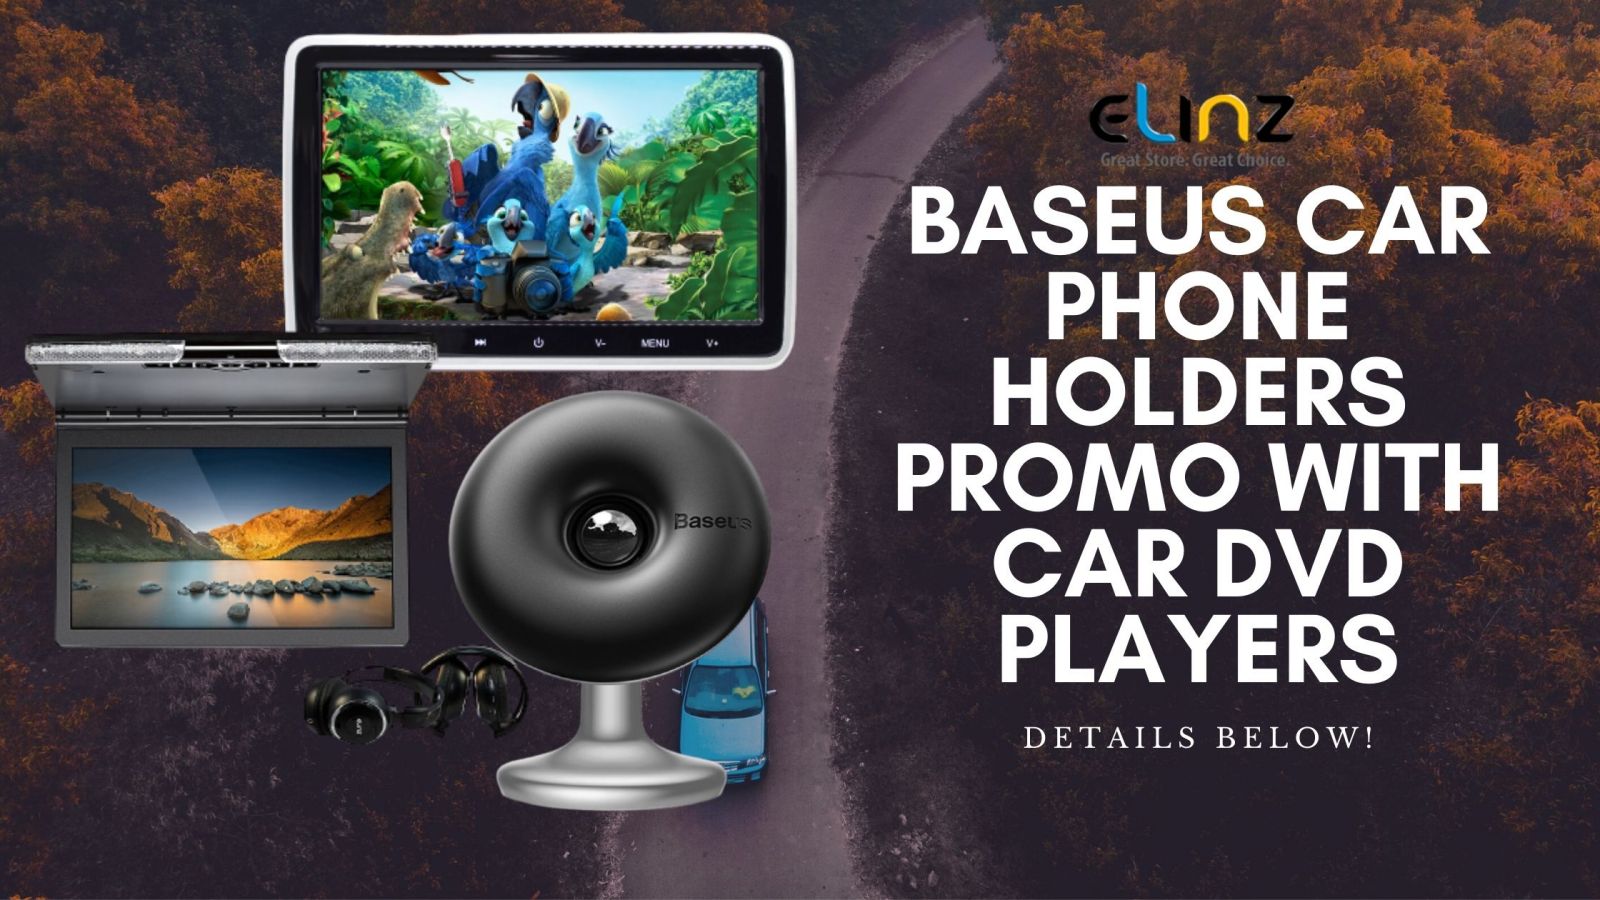 Free Baseus Promo with car dvd player purchase blog banner